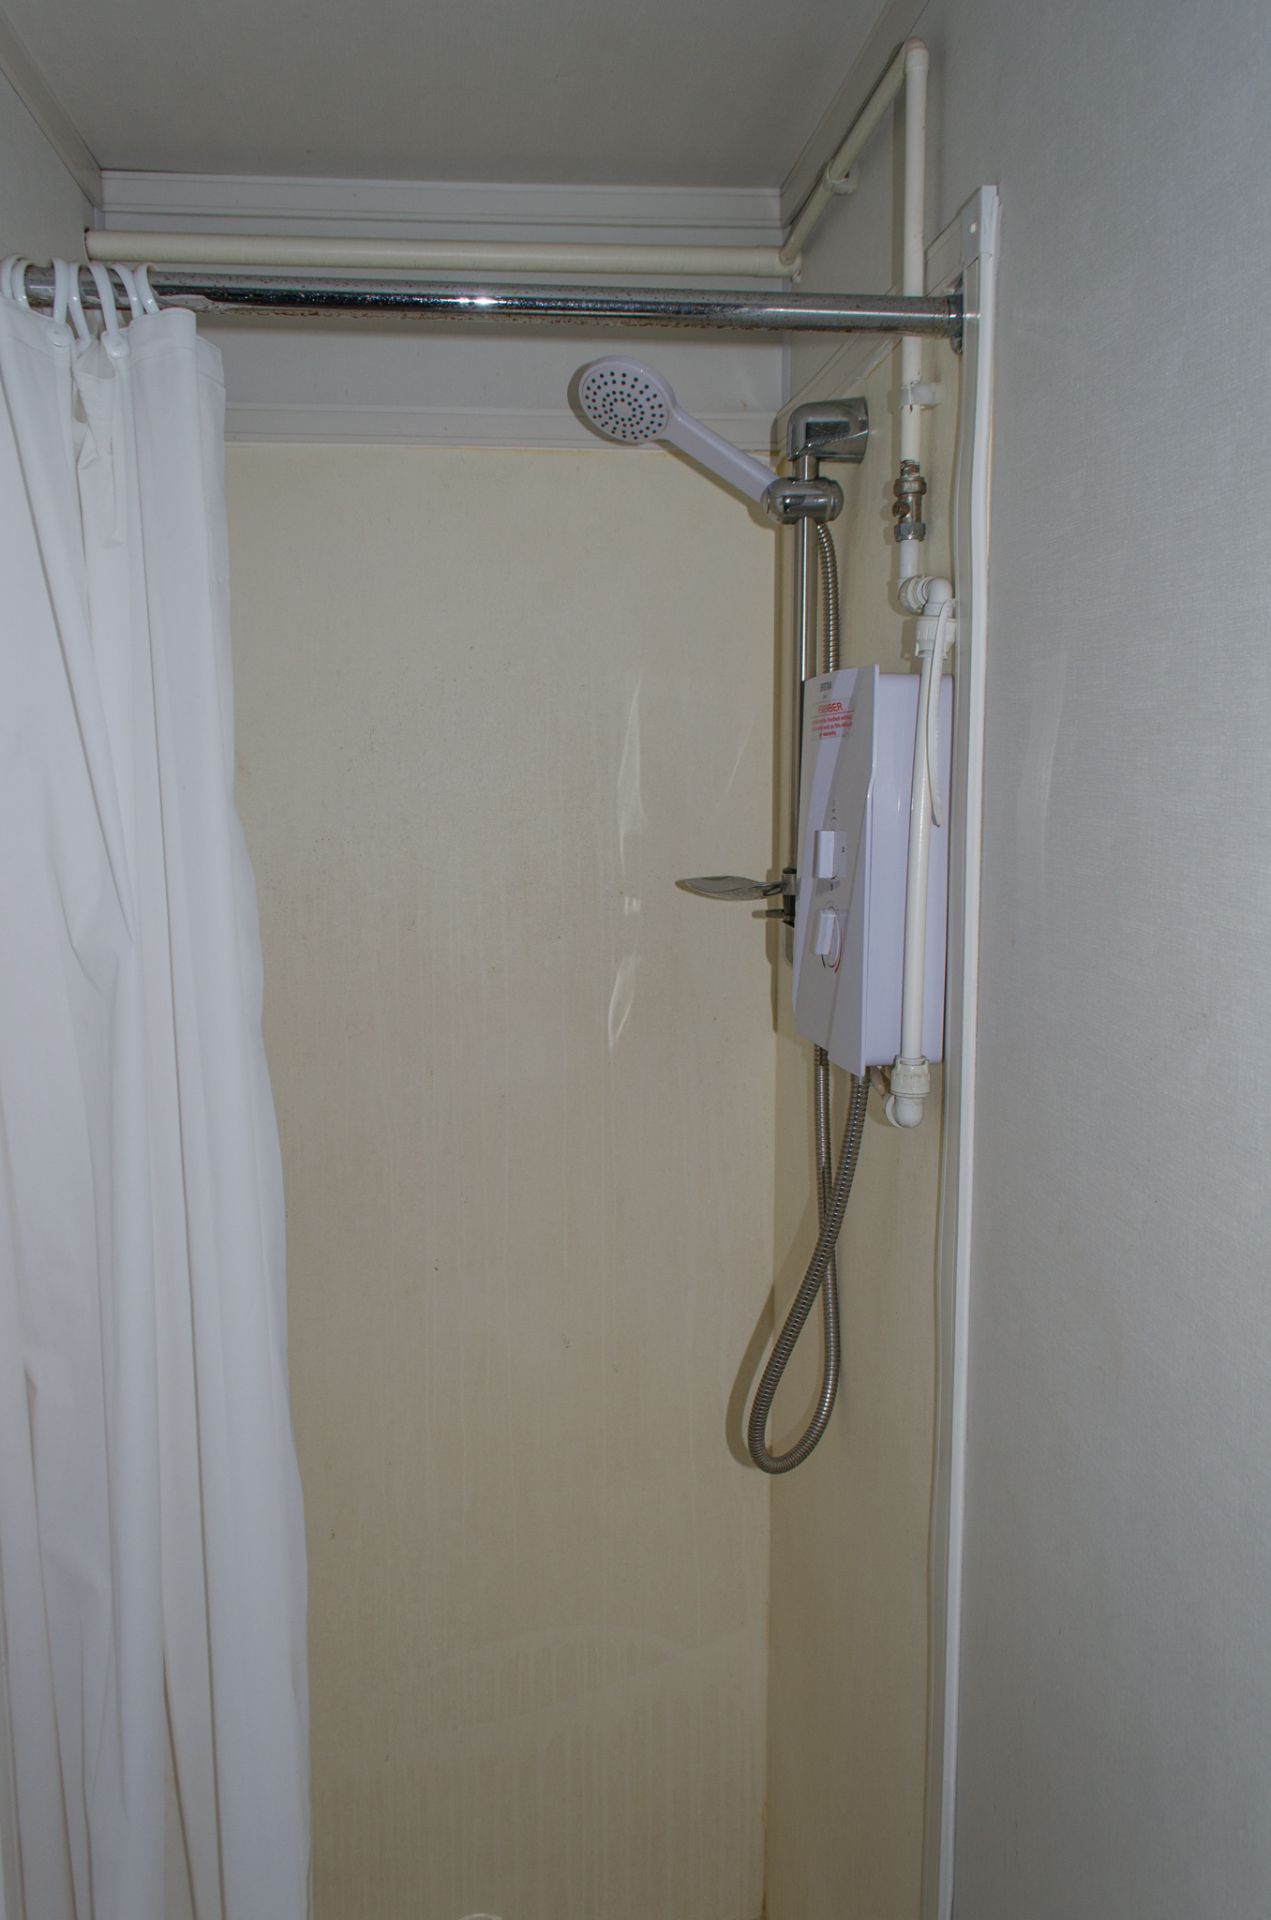 32 ft x 10 ft steel jack leg shower site unit Comprising of 8 - showers & changing area BBA1684 - Image 11 of 14